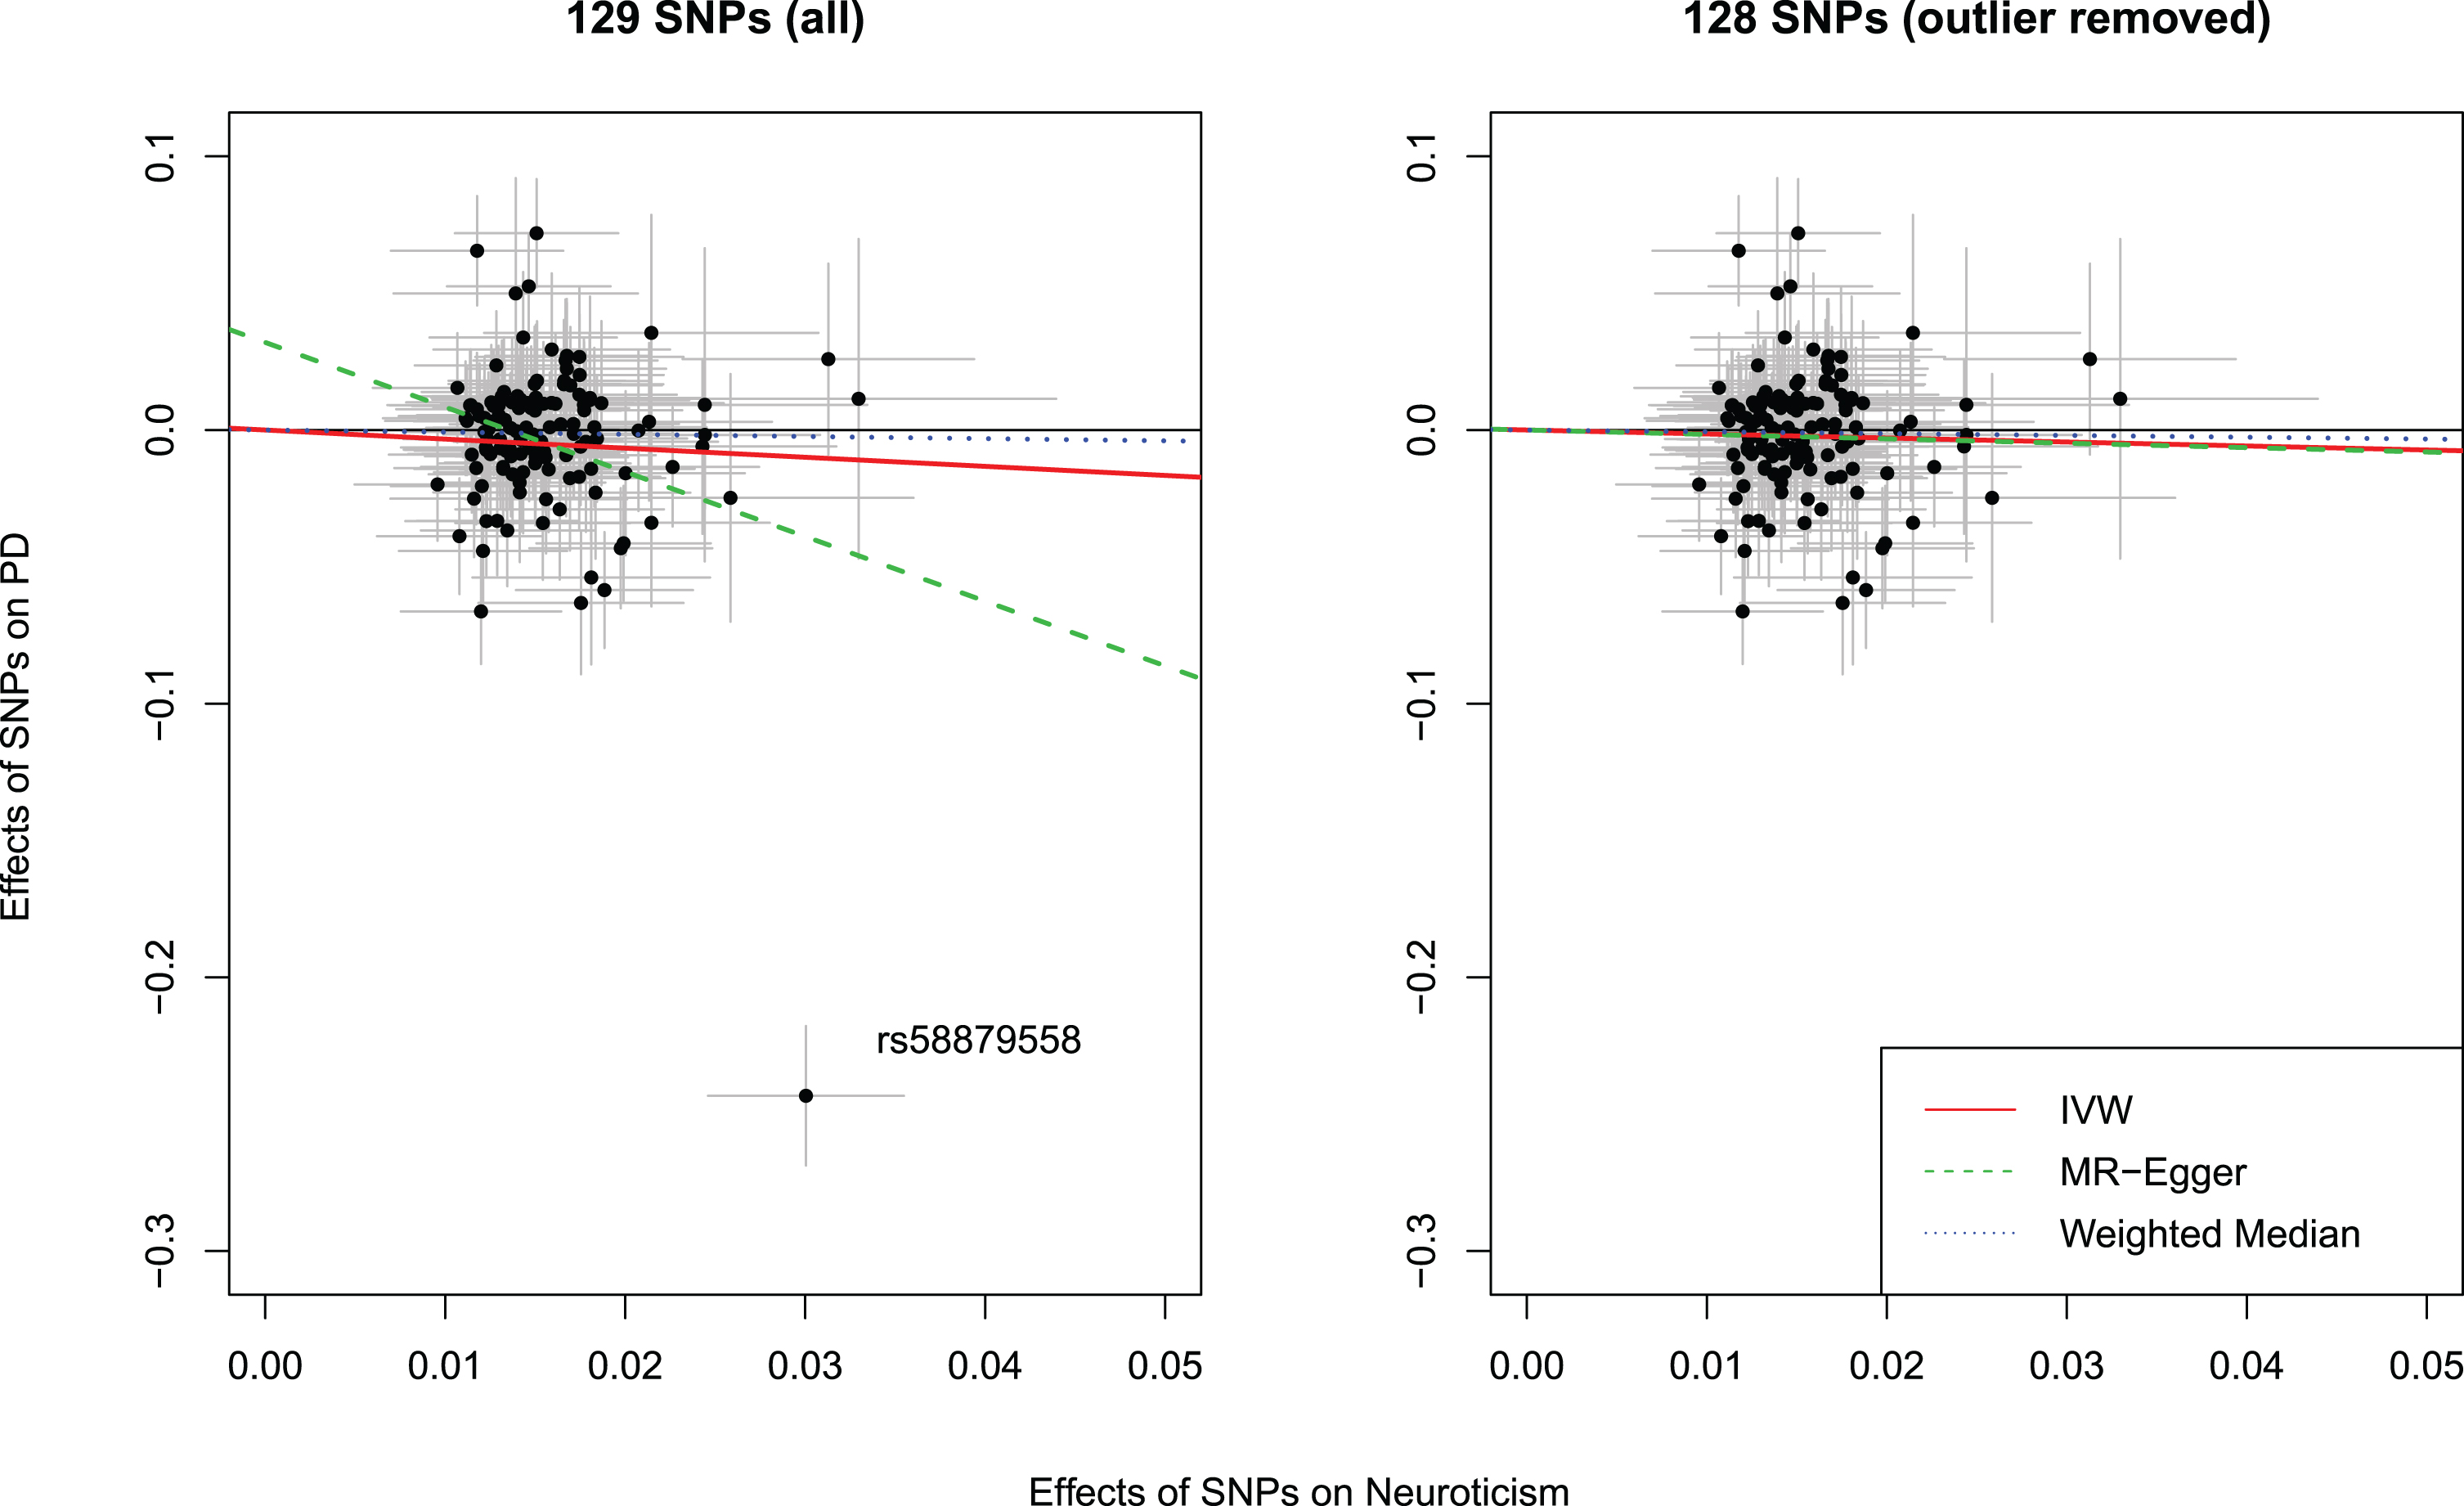 Scatter plots showing the effect estimates (with 95%confidence intervals) of SNP-neuroticism associations and SNP-PD risk associations, with (left panel) and without (right panel) outlier. Lines represent the three Mendelian randomization estimates. IVW, inverse variance weighted method; SNP, single nucleotide polymorphism